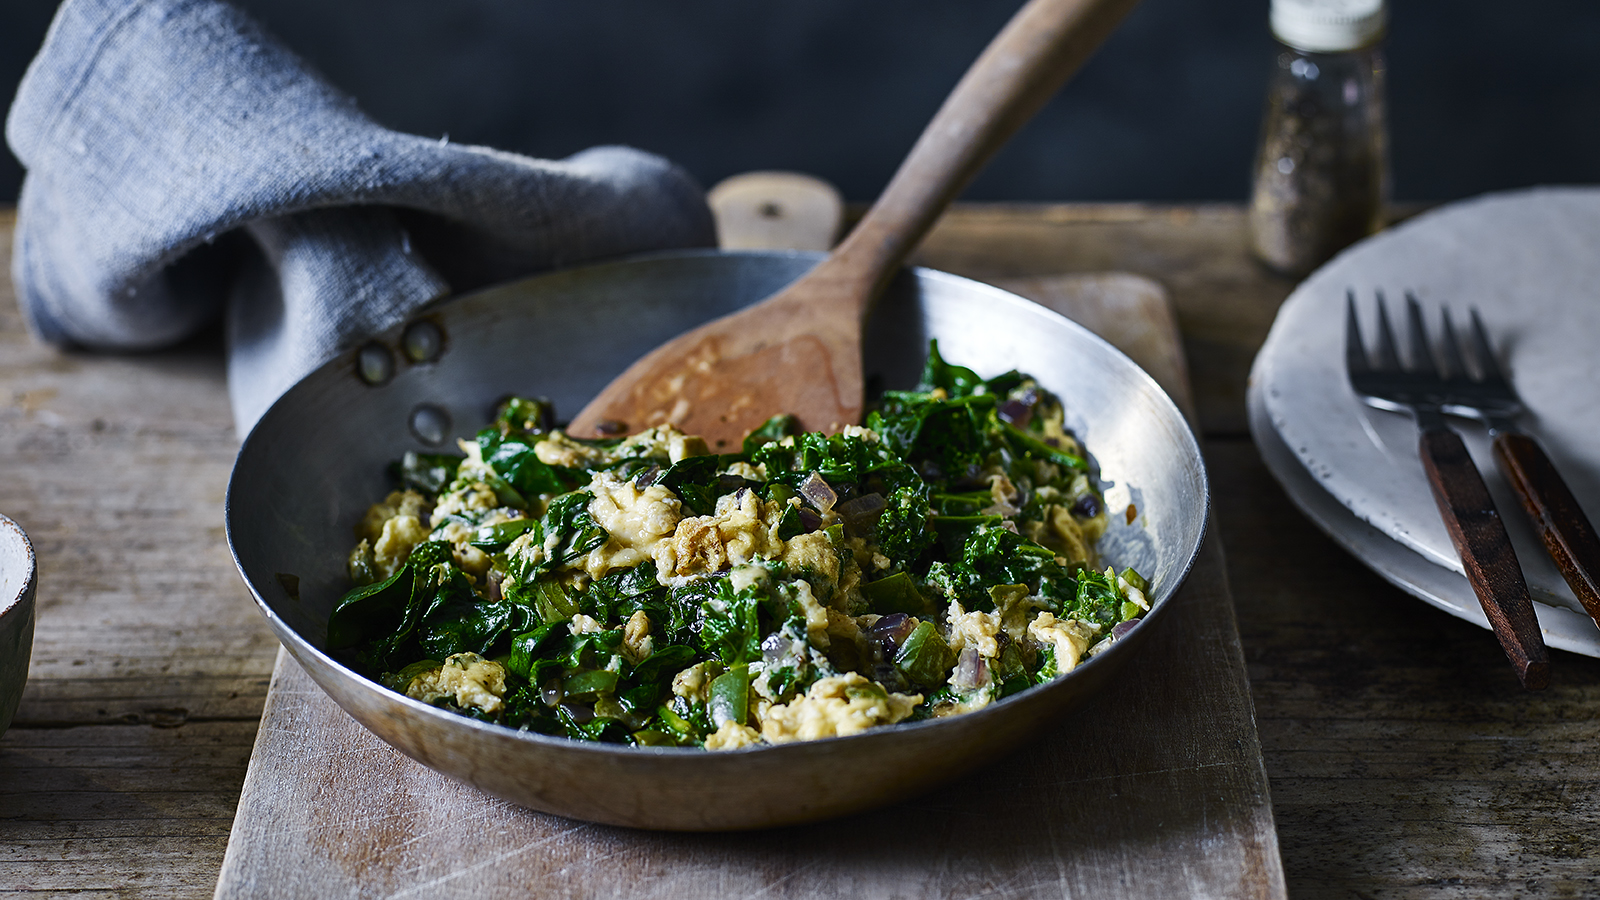 Scrambled Eggs with Creamed Spinach - Epicure's Table